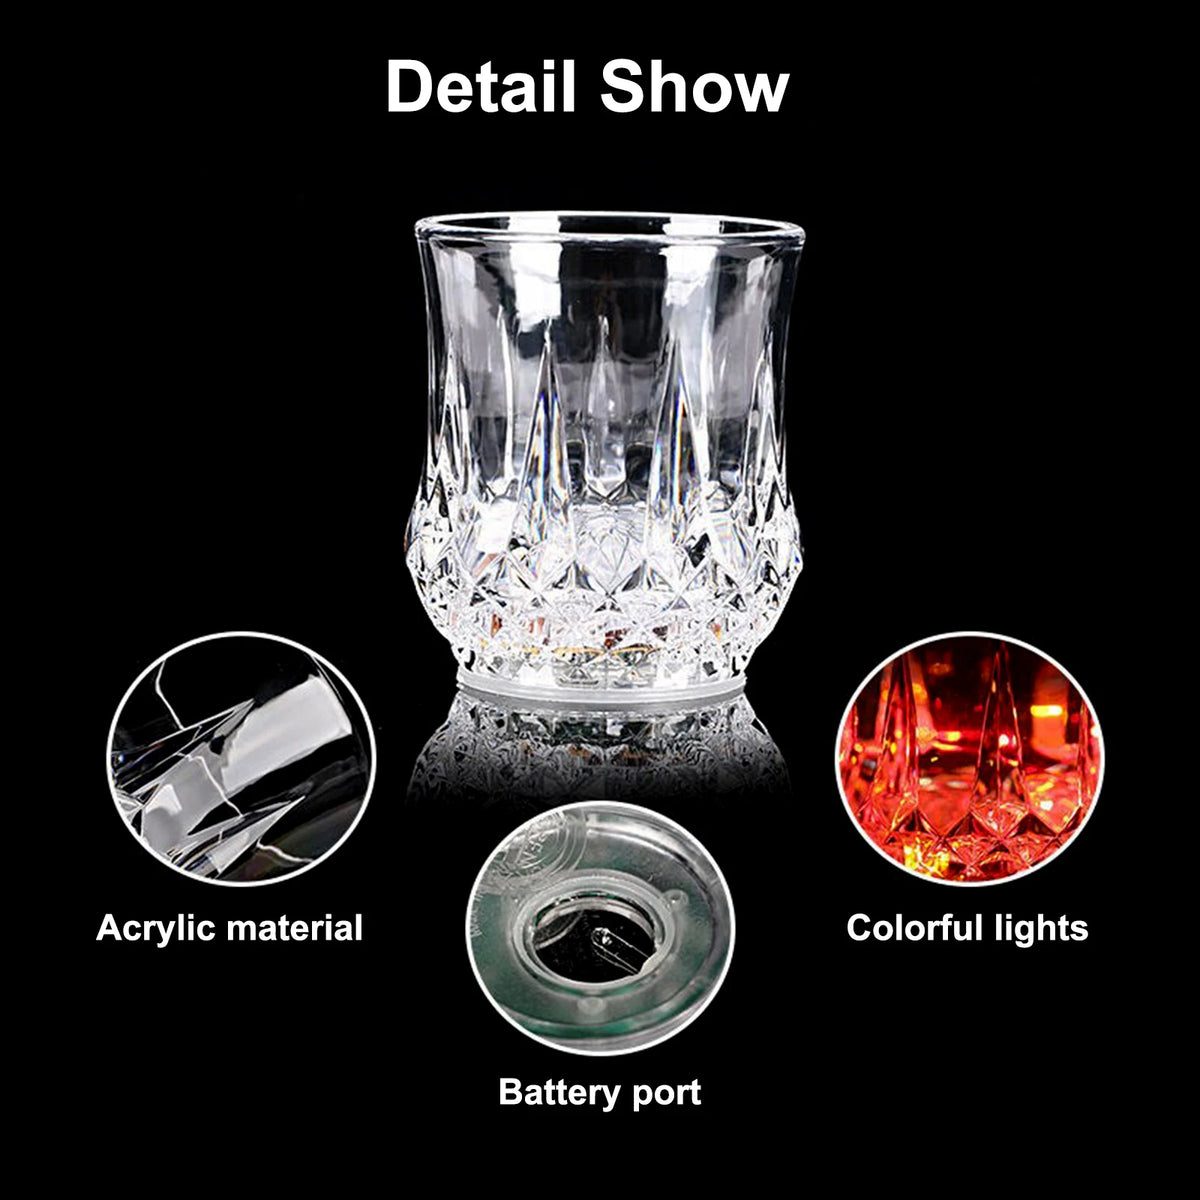 the details of a glass vase with different colors